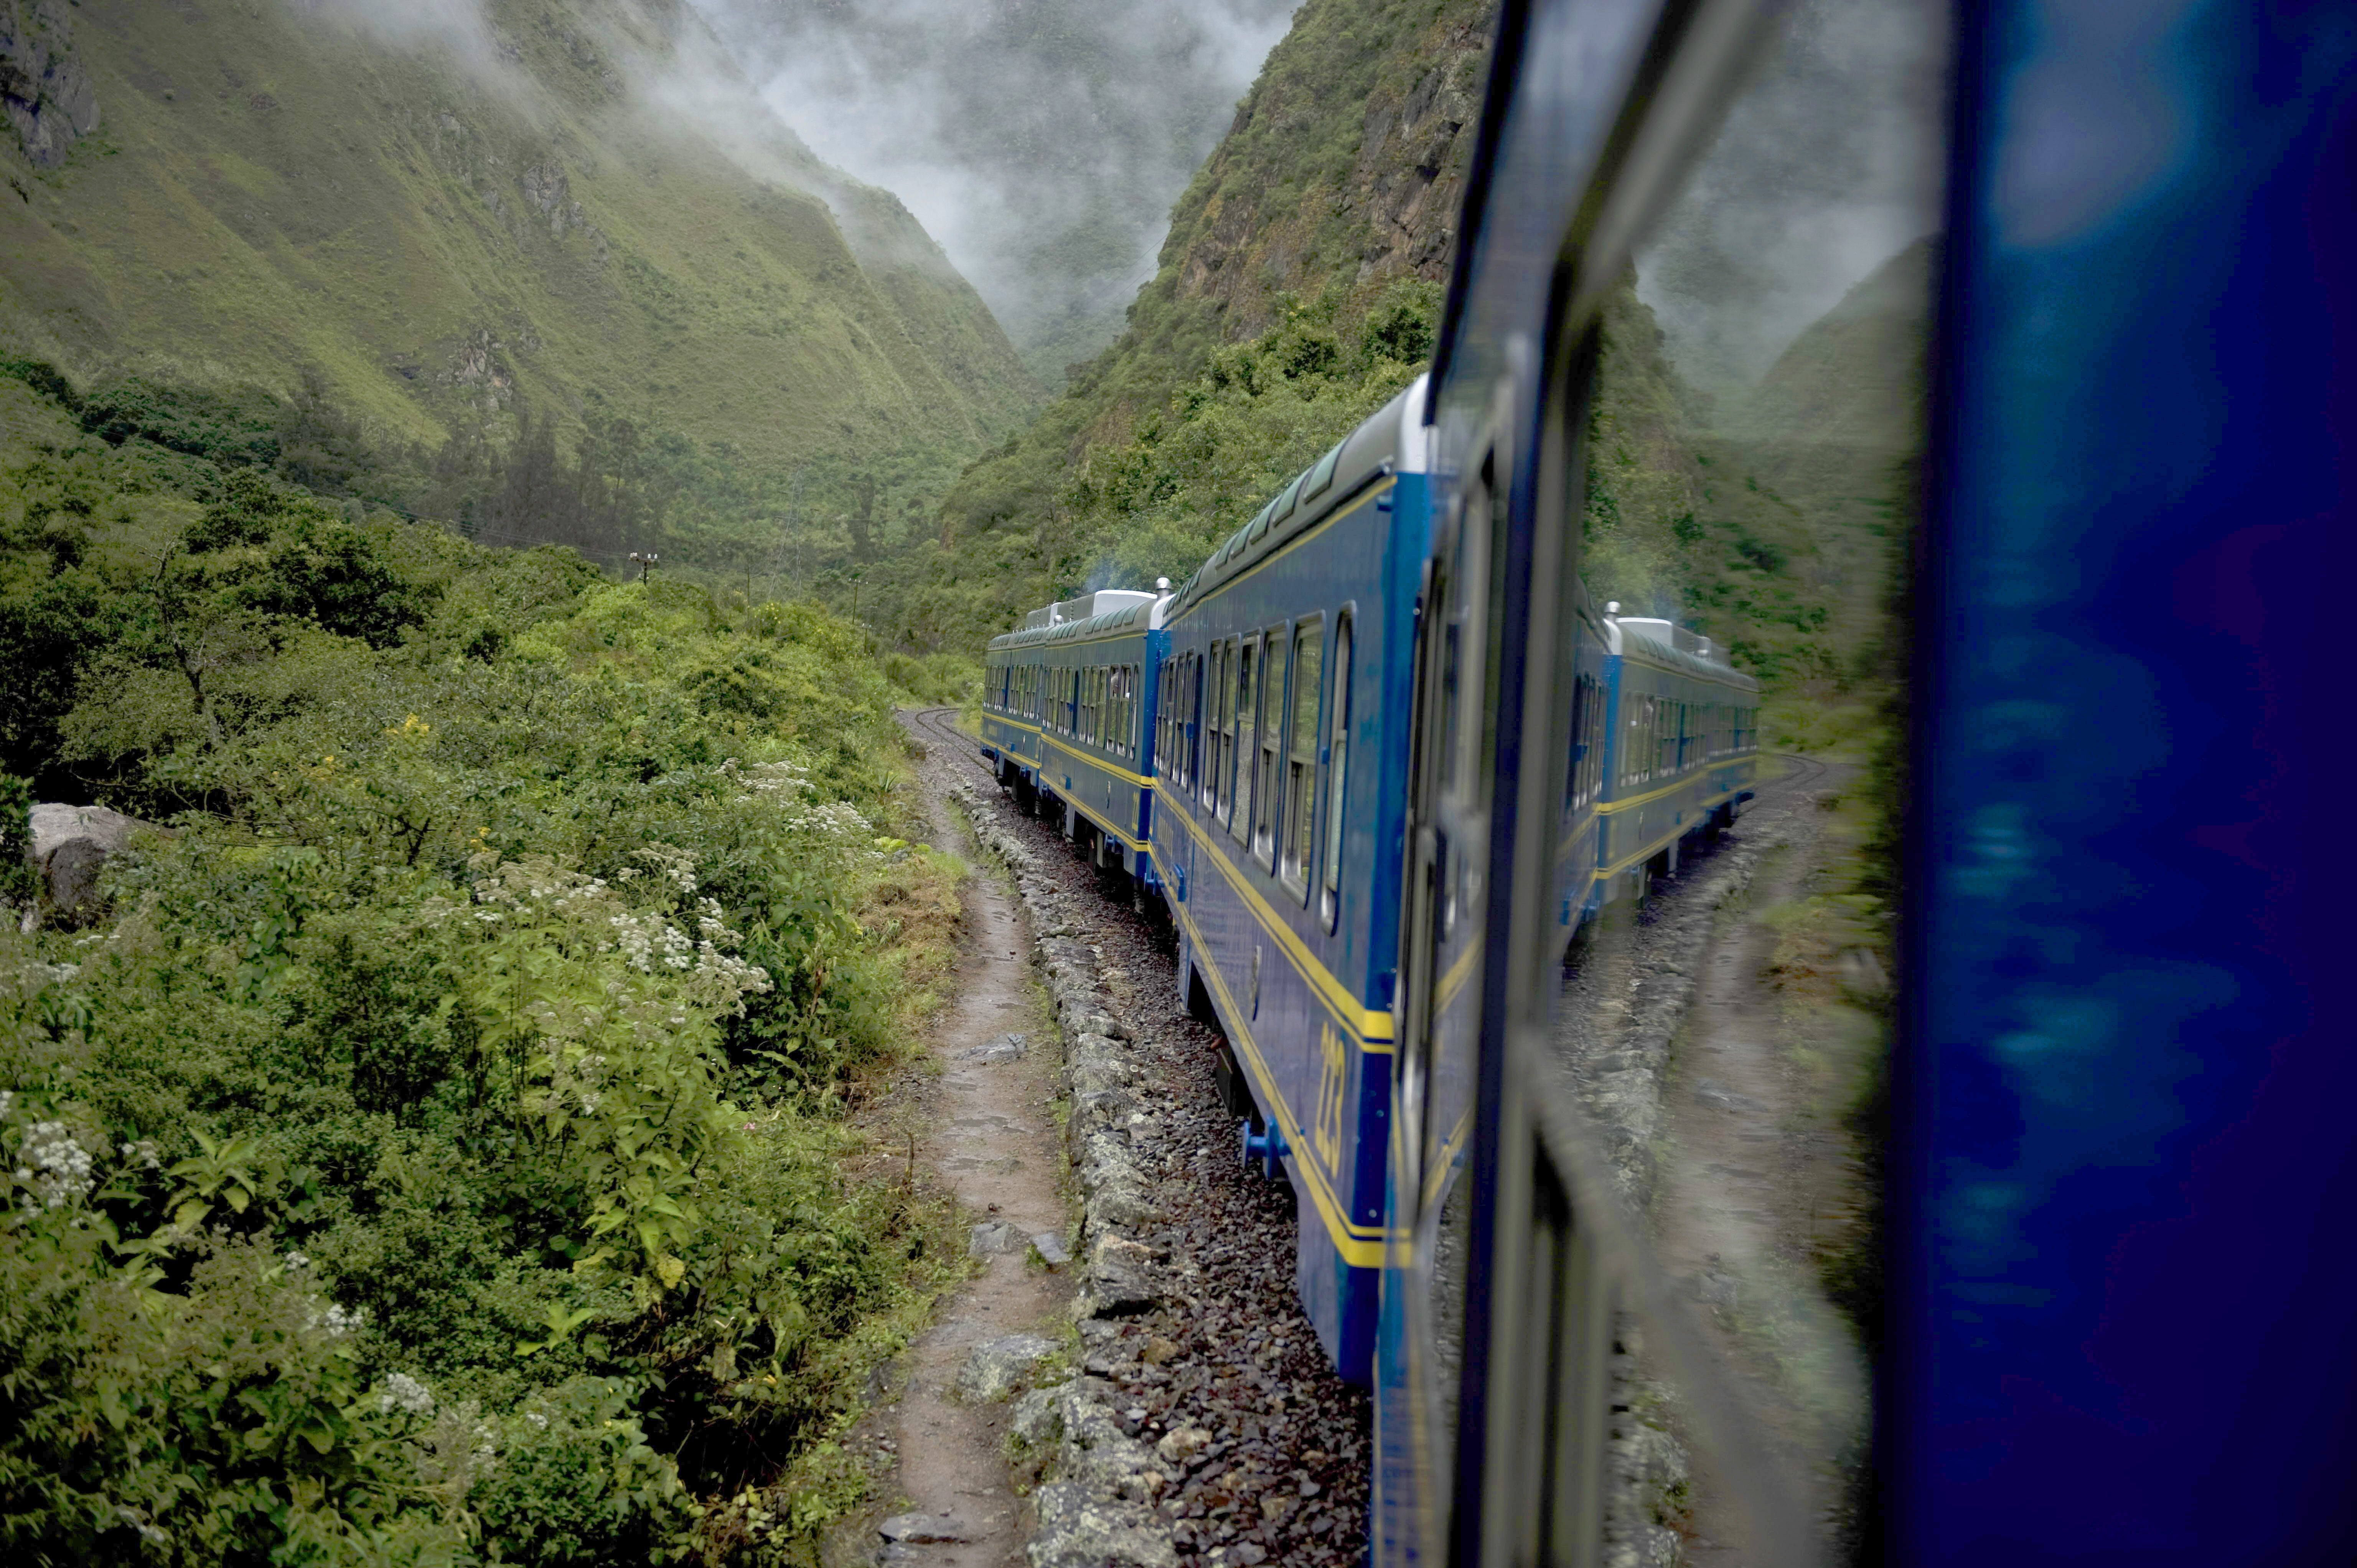 One of the best-known surviving lines in South America is in Peru, connecting the Andean city of Cusco with Machu Picchu